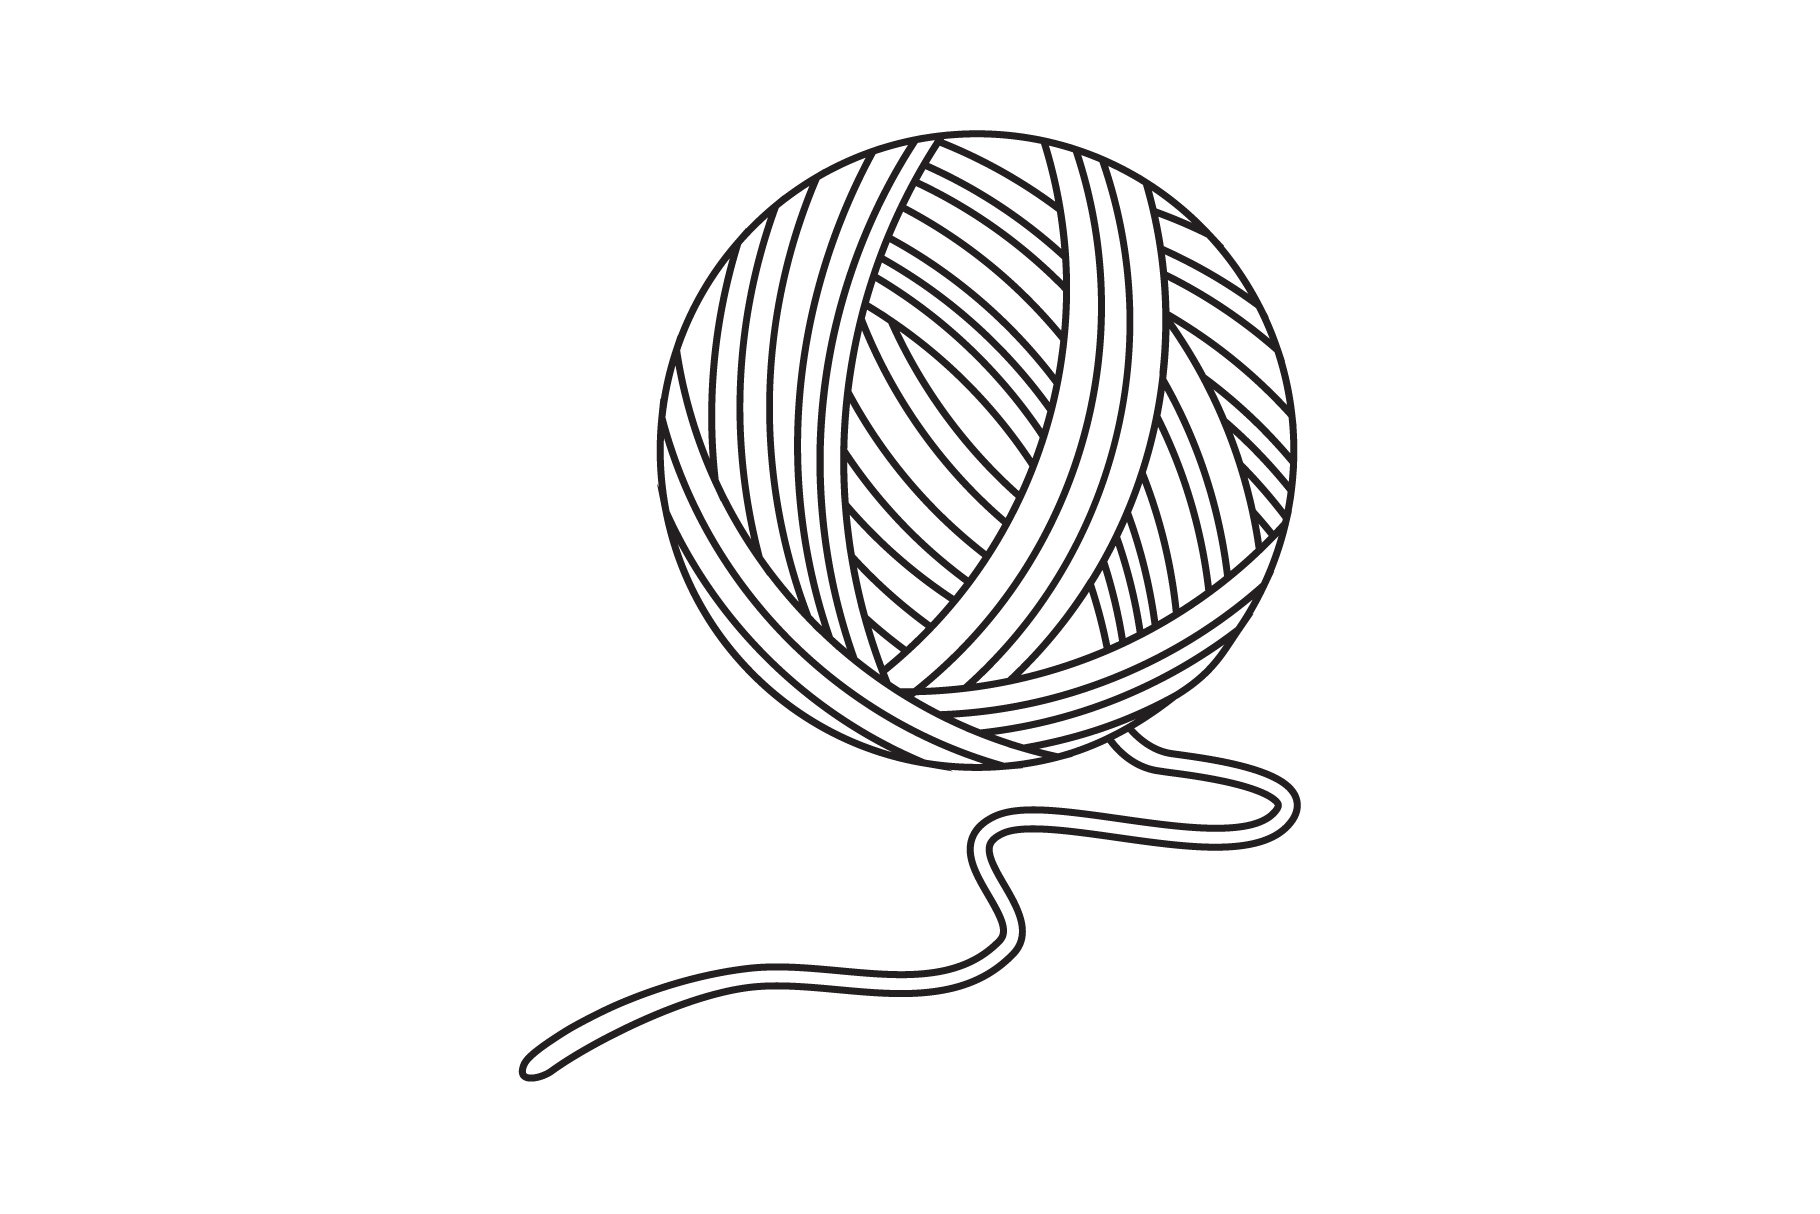 Yarn ball for knitting cover image.